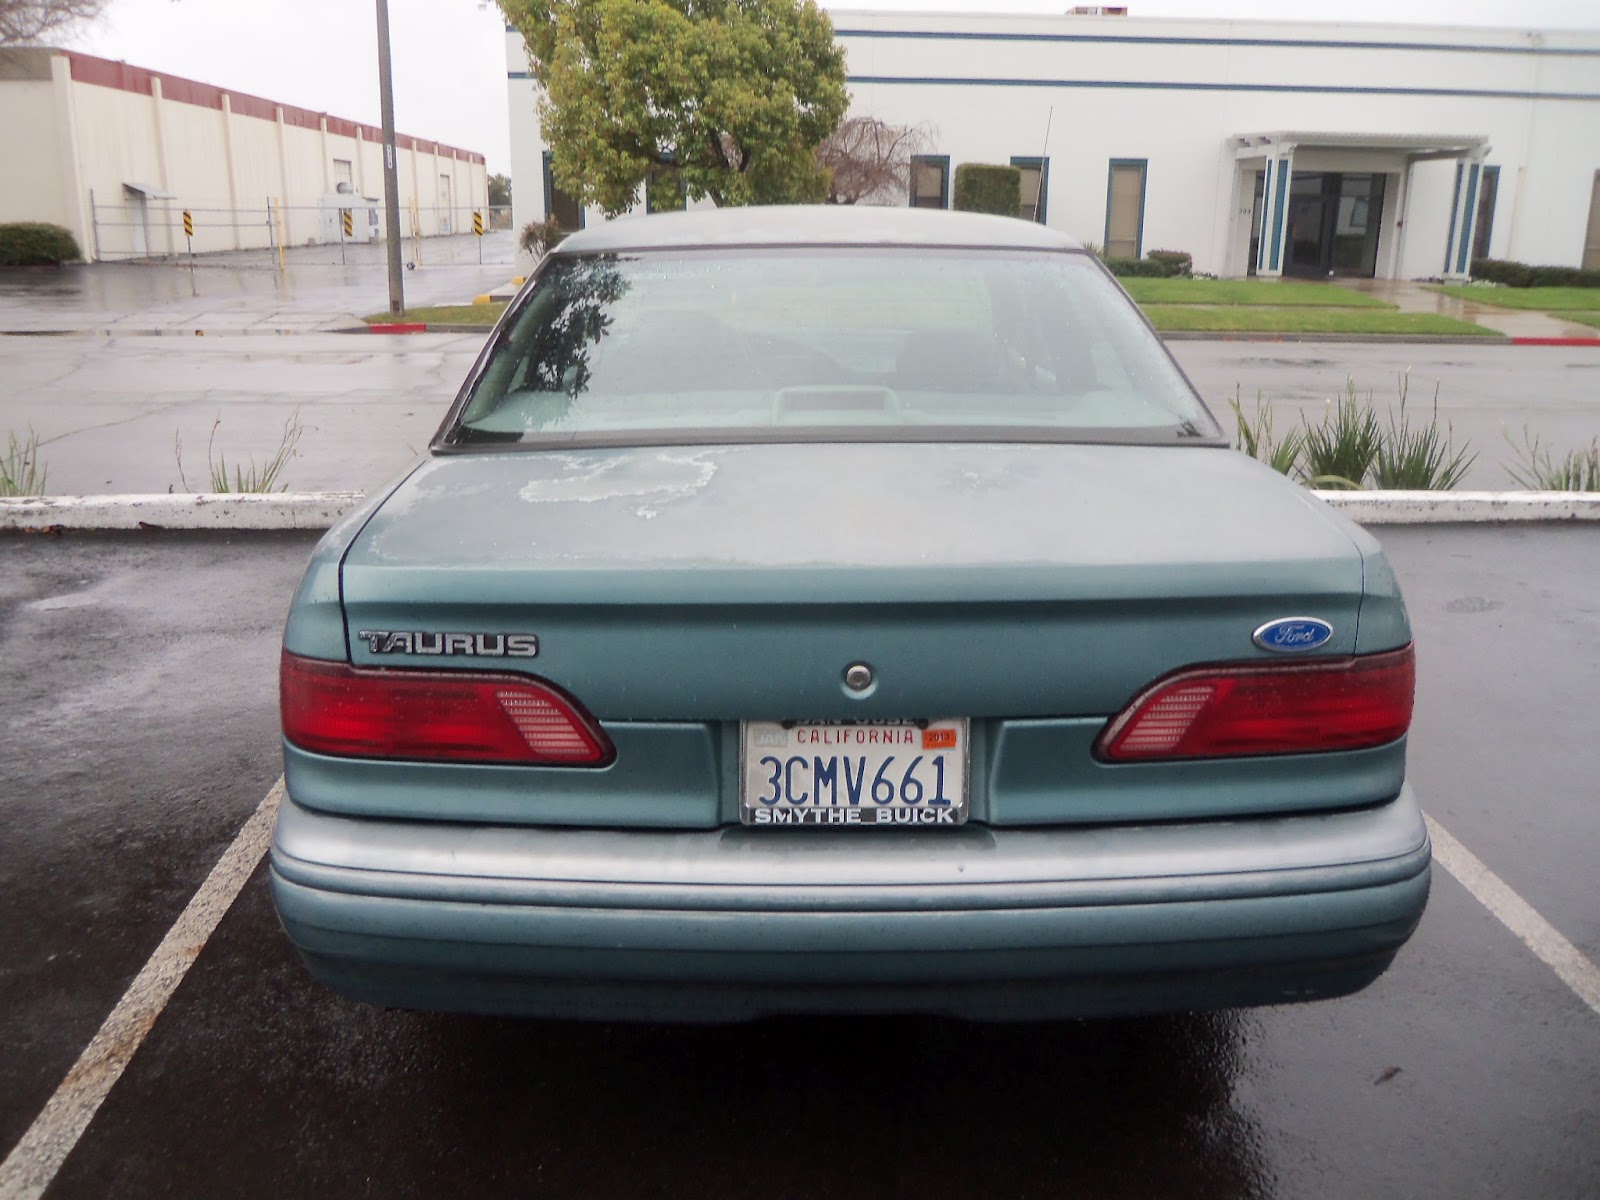 1993 Ford taurus paint colors #9